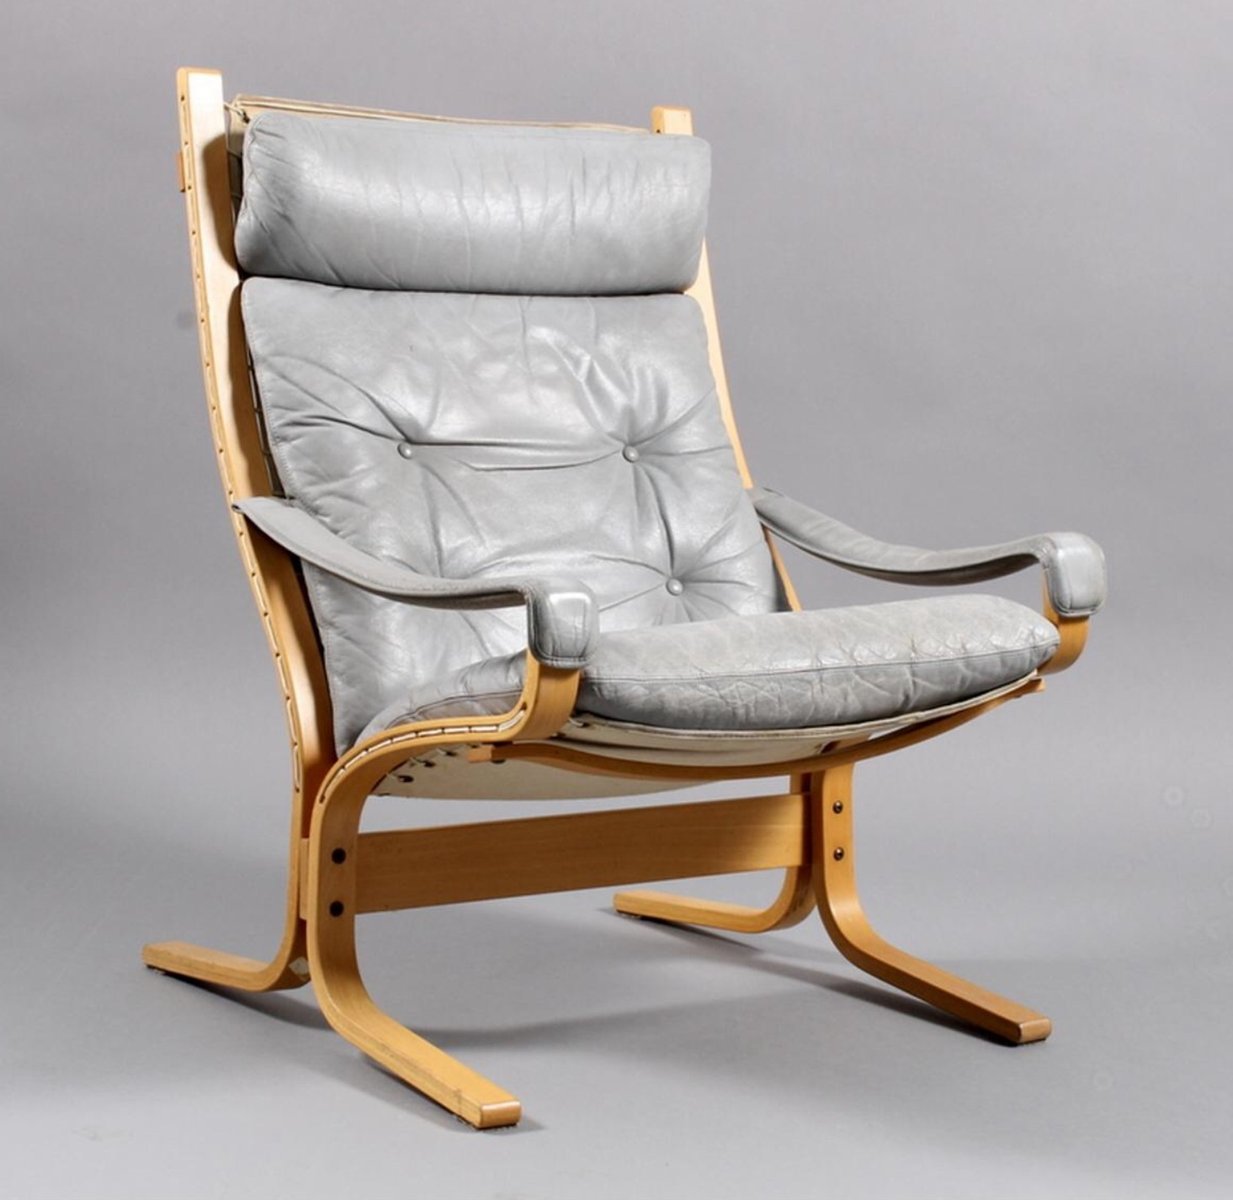 Siesta Easy Chair by Ingmar Relling, 1965 for sale at Pamono